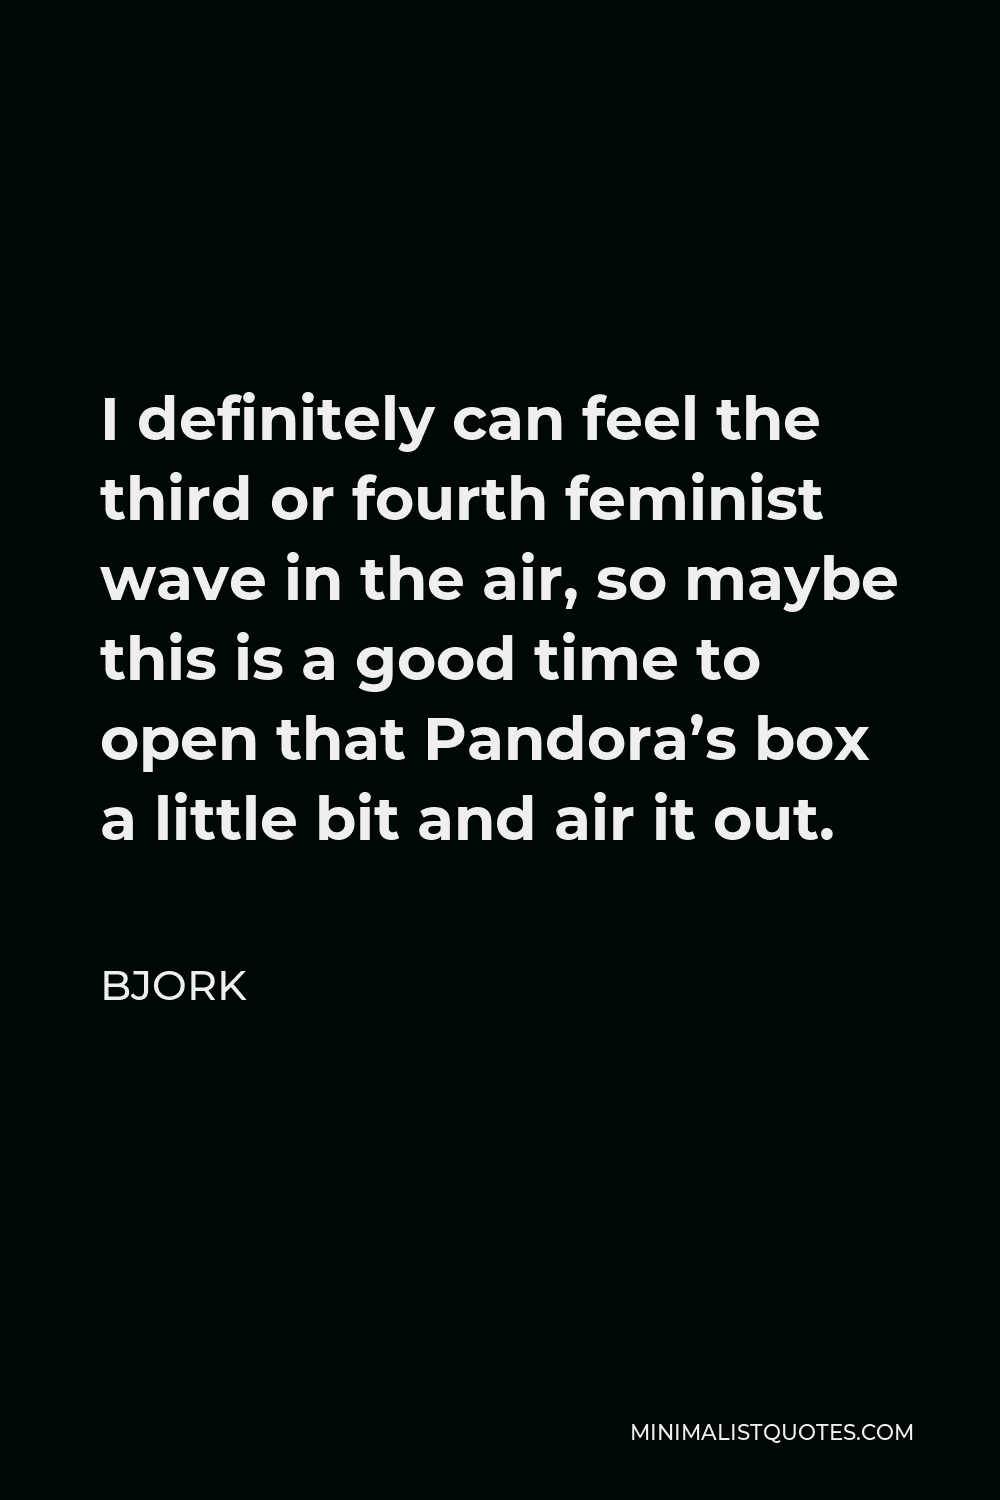 Bjork Quote - I definitely can feel the third or fourth feminist wave in the air, so maybe this is a good time to open that Pandora’s box a little bit and air it out.